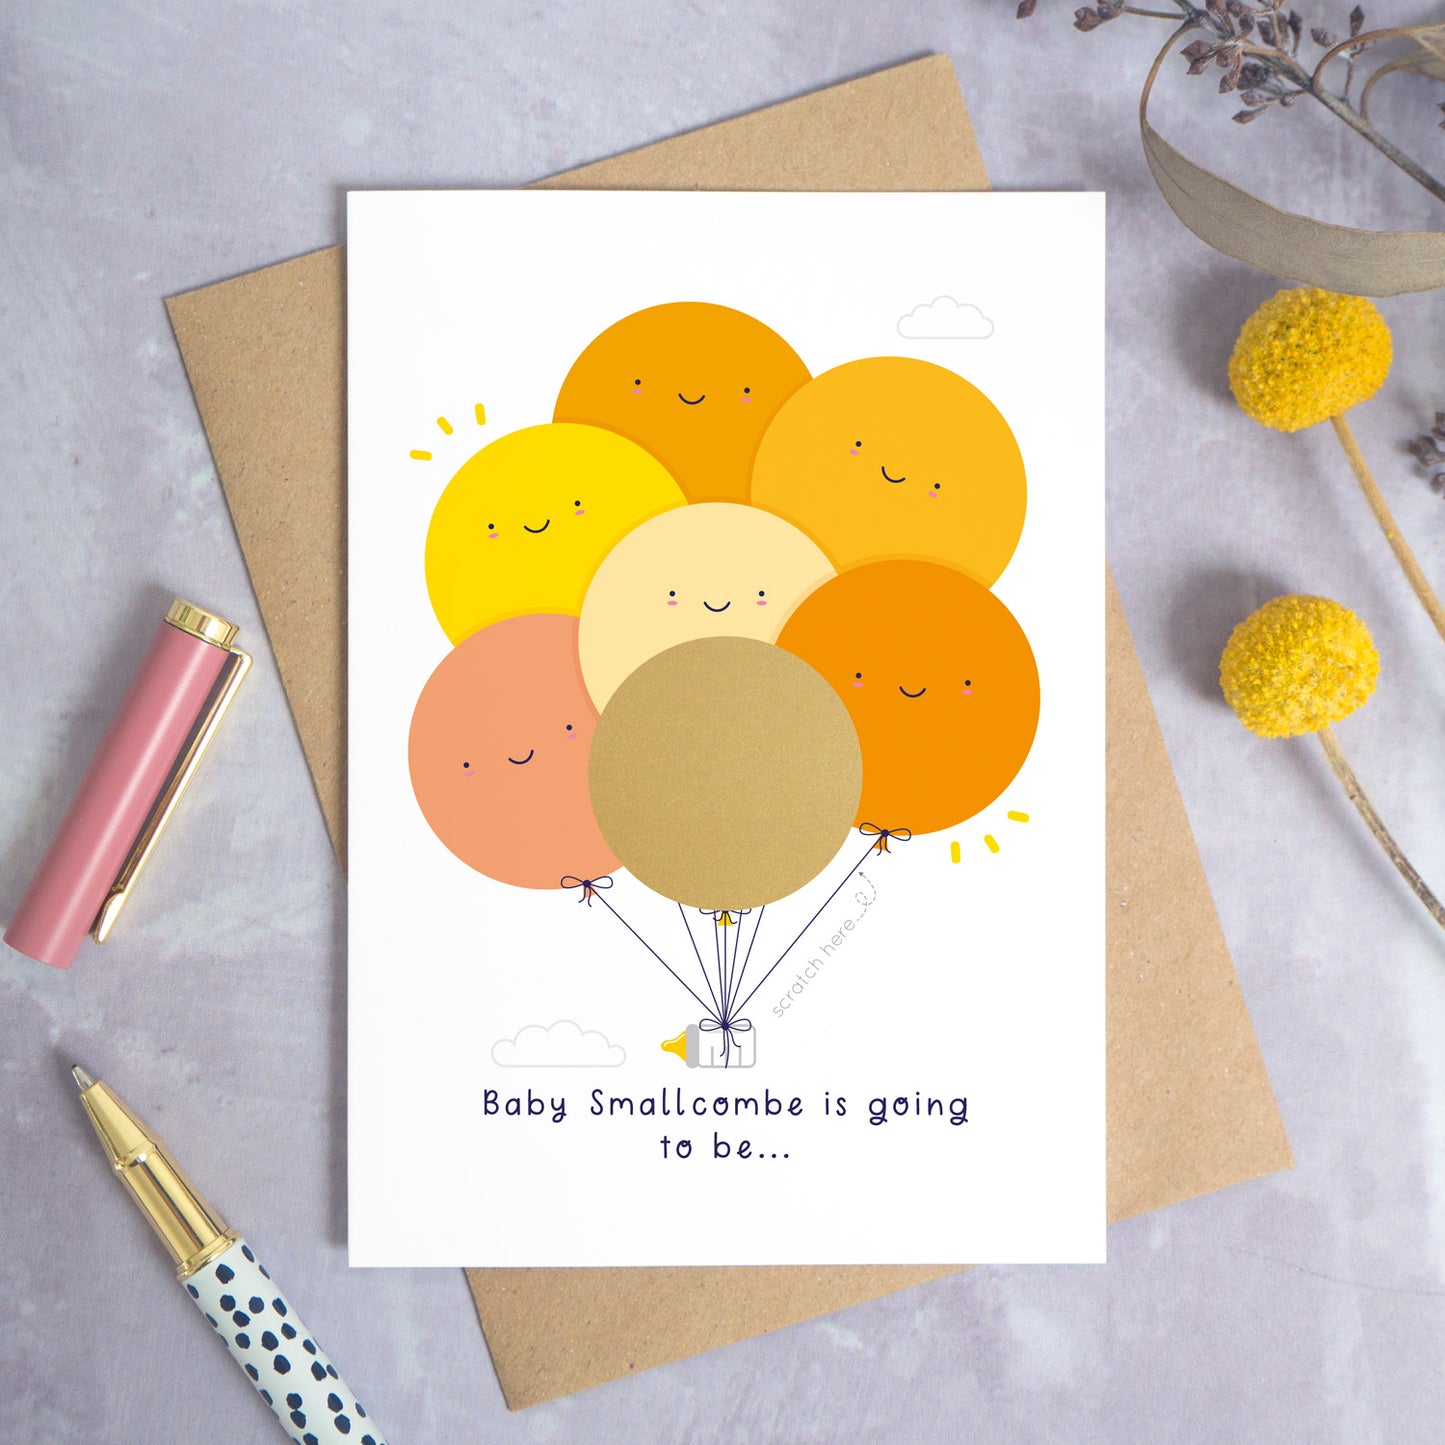 A ‘gender reveal’ scratch card photographed on a grey background with a pen on the left and yellow and purple flowers on the right. This is the yellow and orange version of the card before the gold panel has been scratched off.